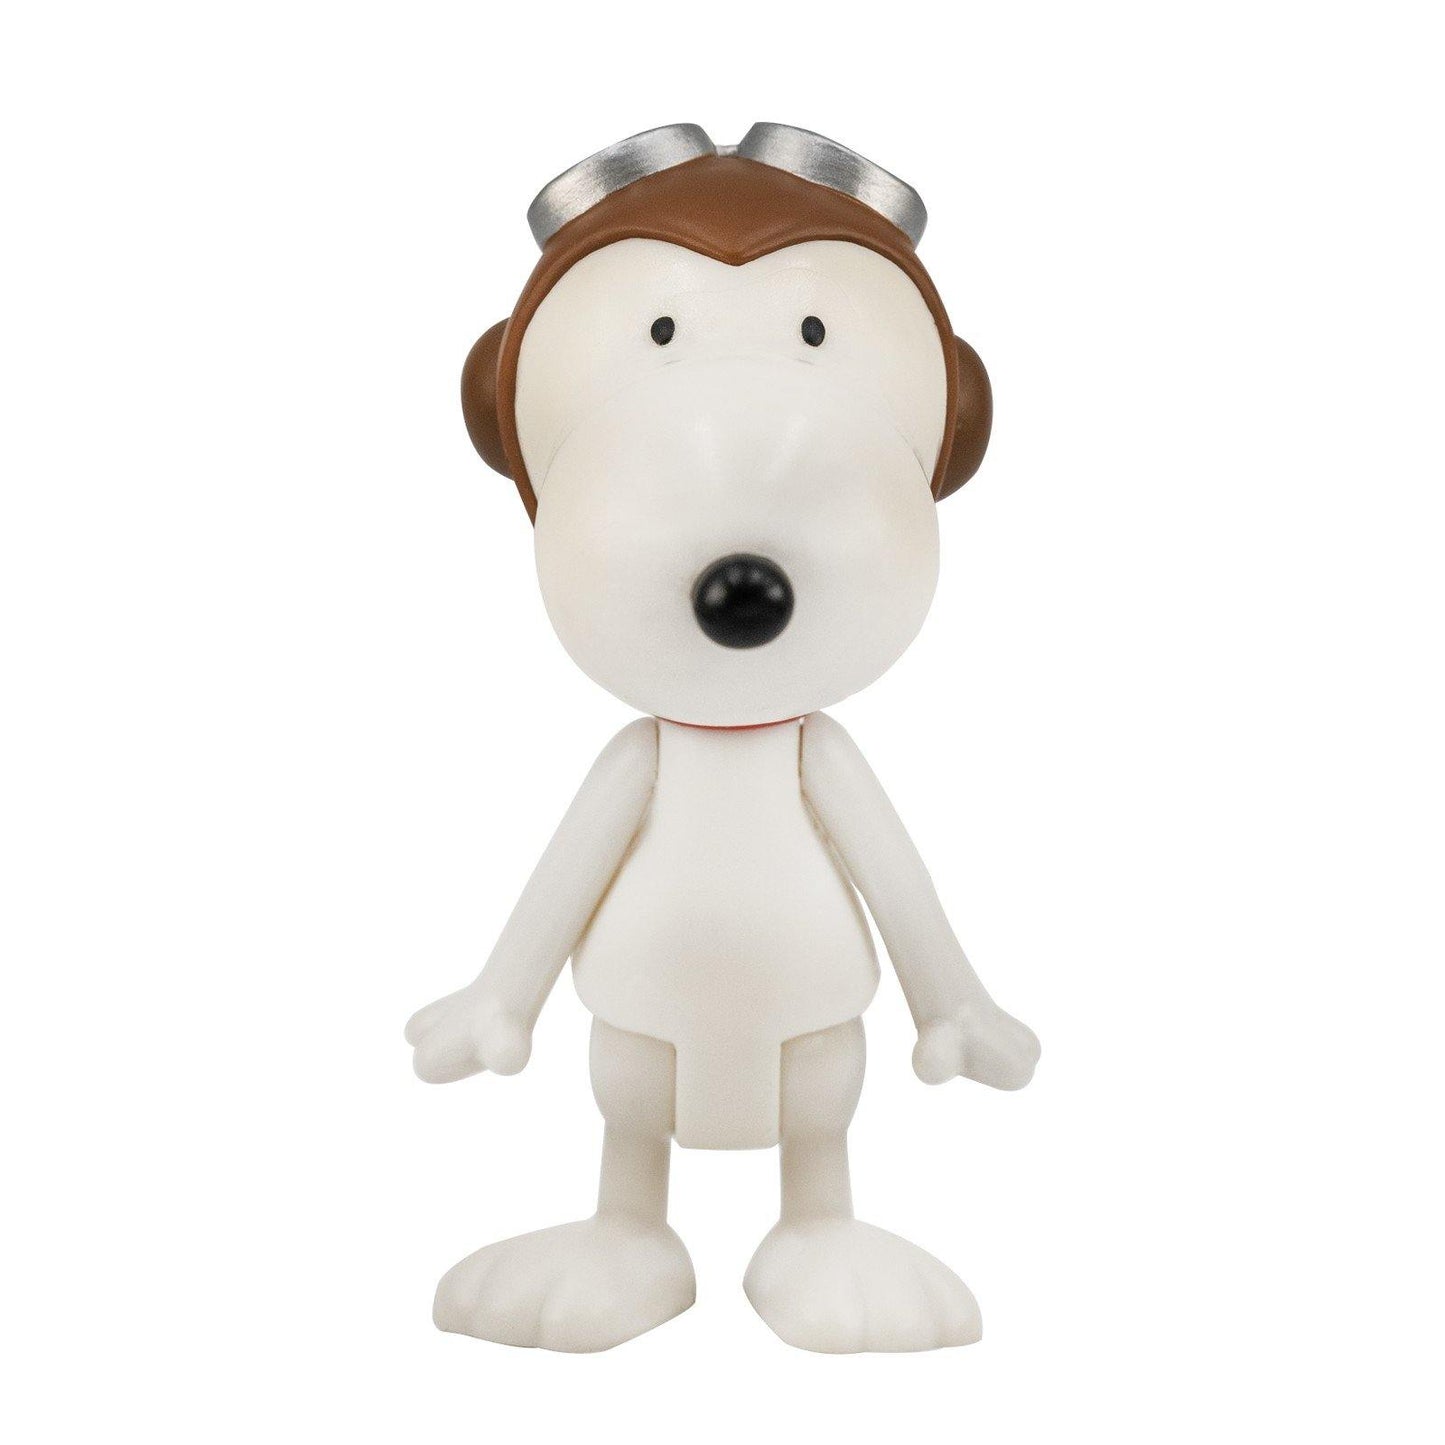 Peanuts Wave 2: Snoopy Flying Ace ReAction Figure 8 cm - Peanuts, Snoopy, Snoopy Flying Ace, super7 - Gadgetz Home